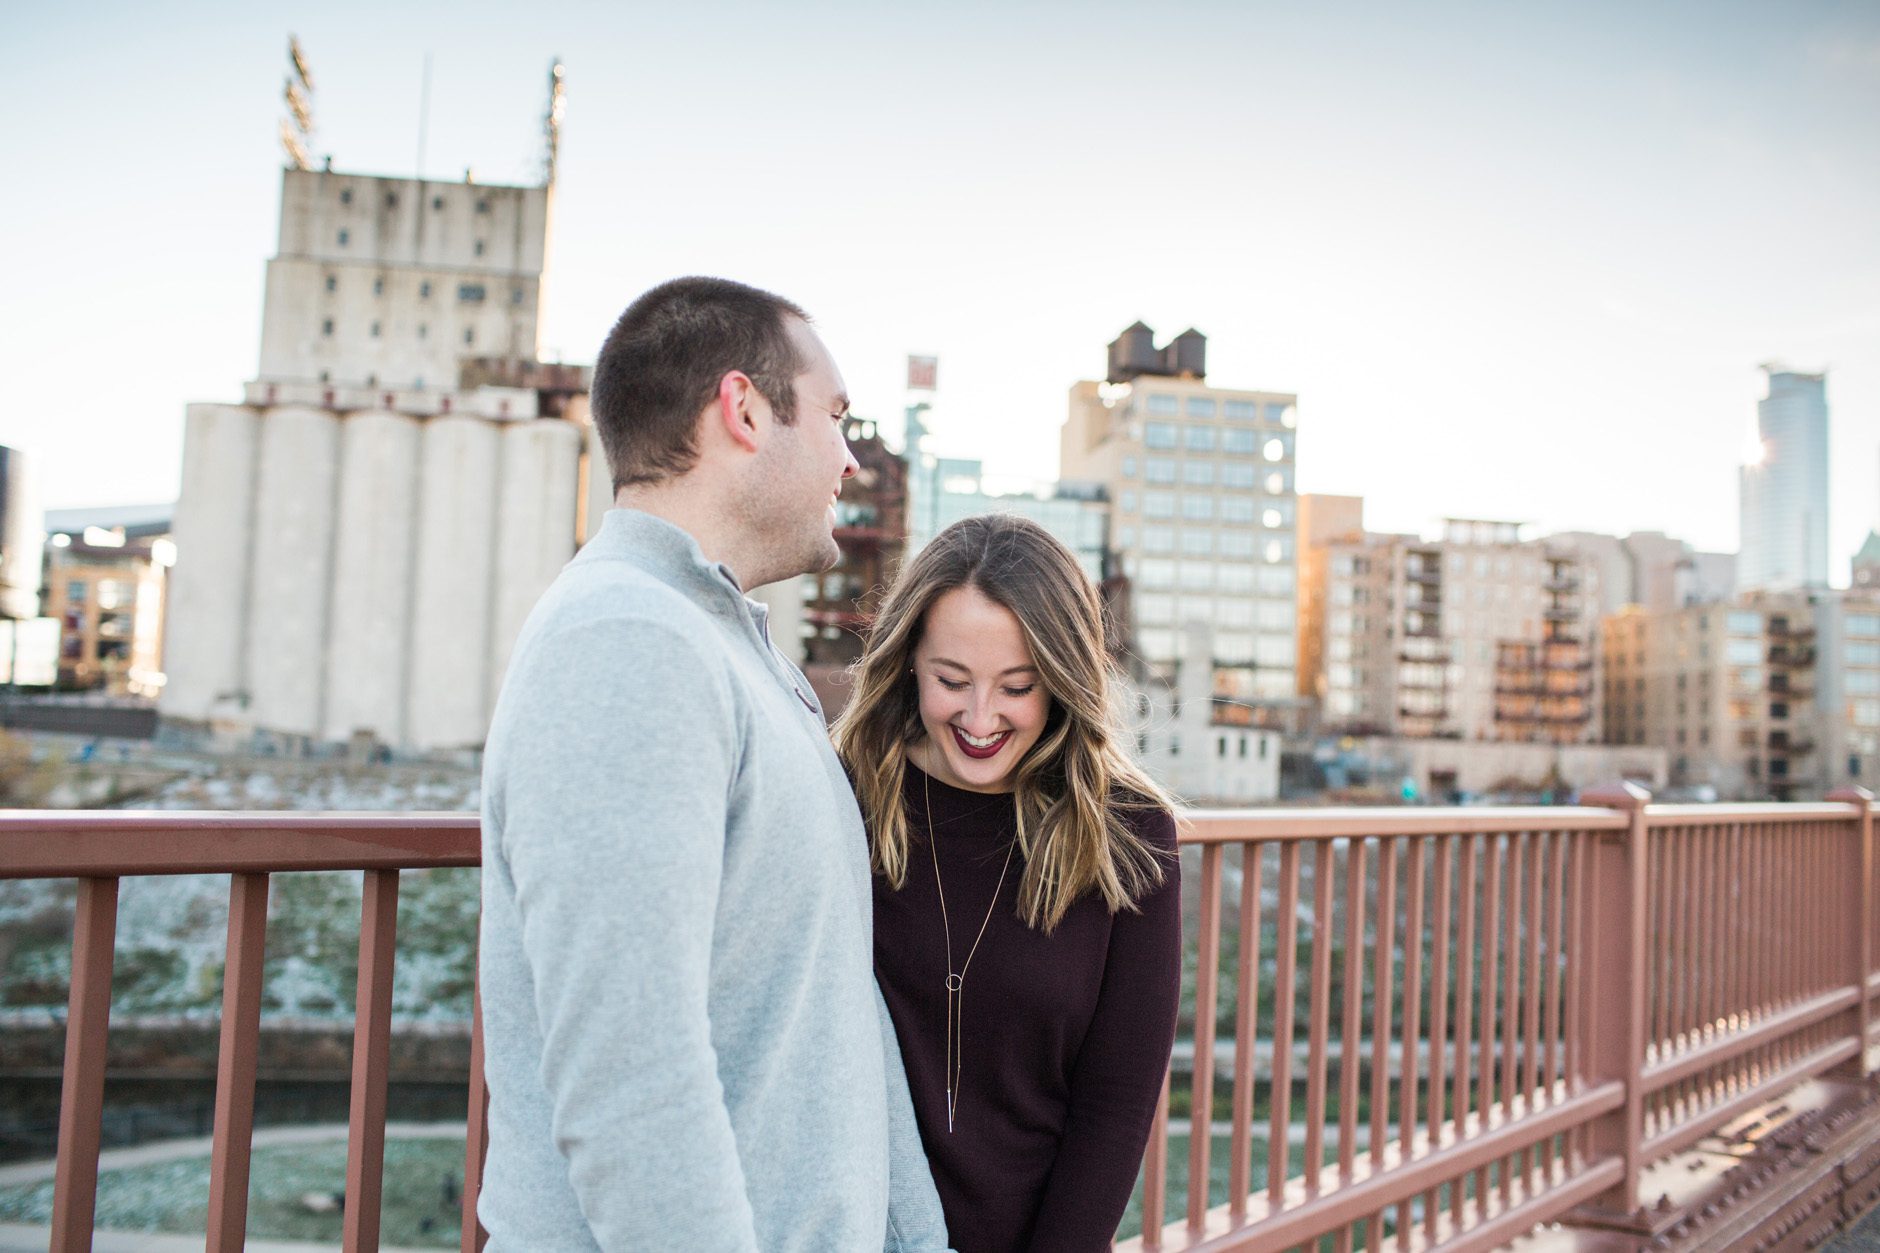 engagement-photography-minneapolis-stonearch-eileenkphoto-142